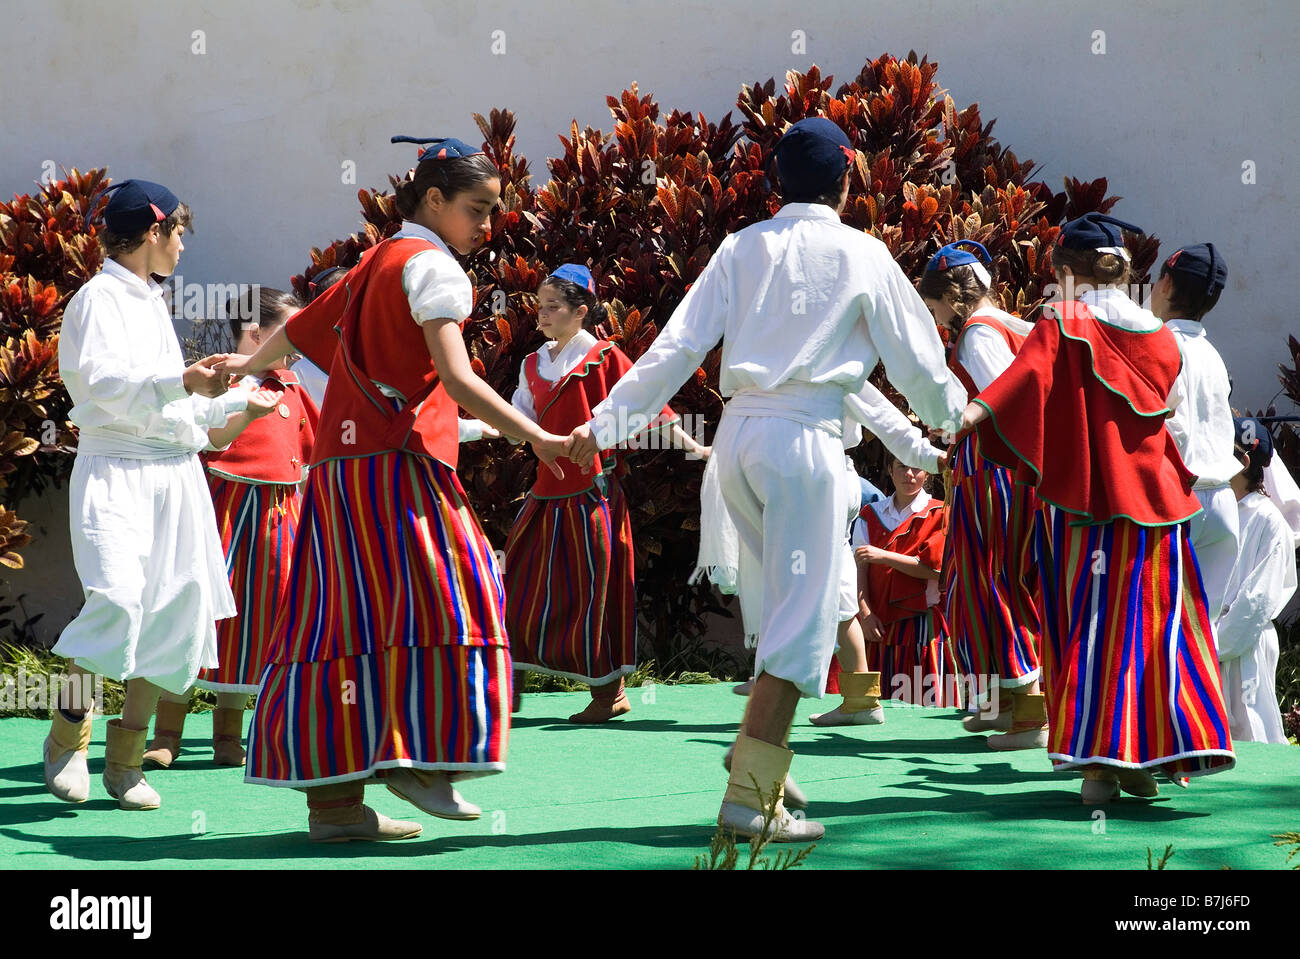 dh Flower Festival FUNCHAL MADEIRA Children traditional costume dancing display portugal folk dance national custom tradition kid dancers performing Stock Photo